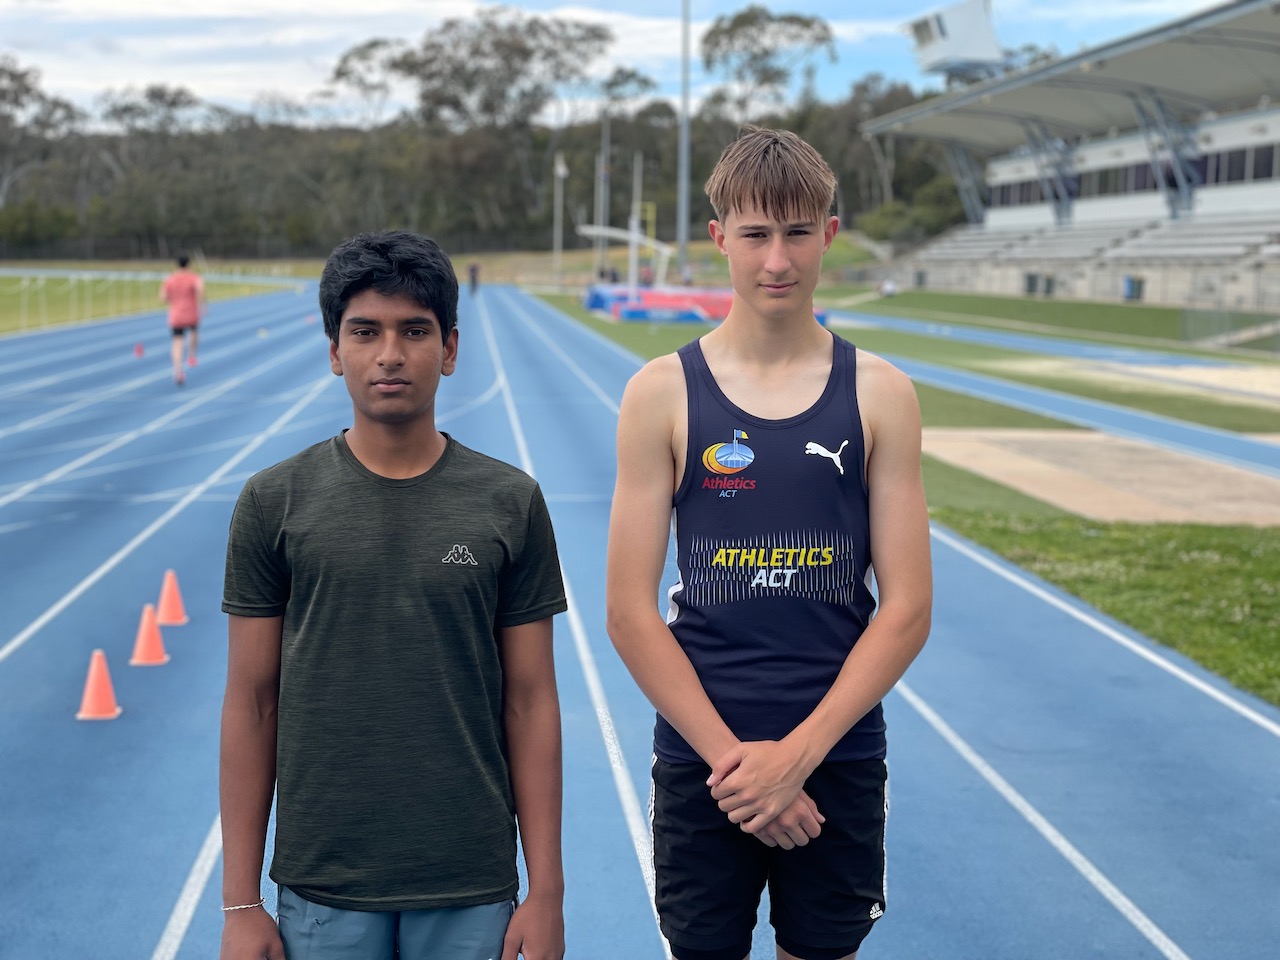 Vishal and Joshua doing Sprint and running training at the AIS in Belconnen